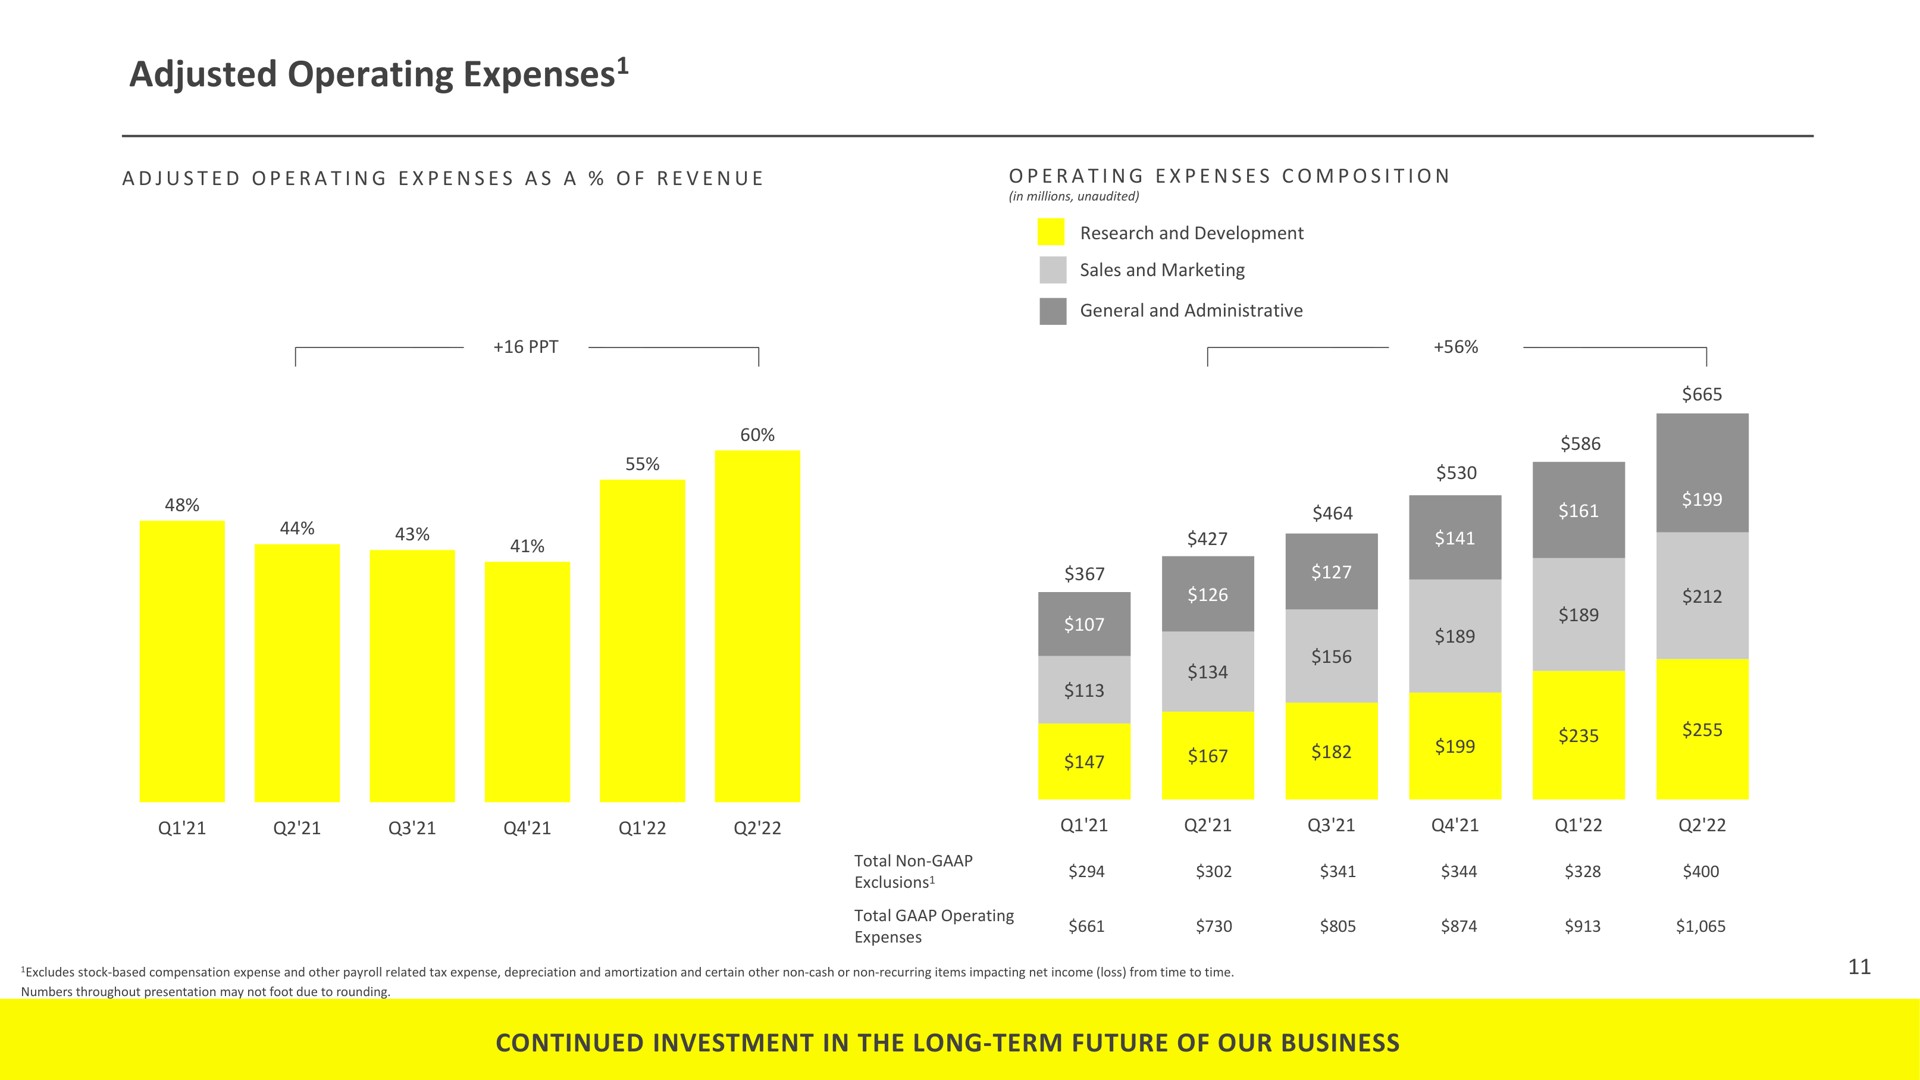 adjusted operating expenses continued investment in the long term future of our business expenses | Snap Inc